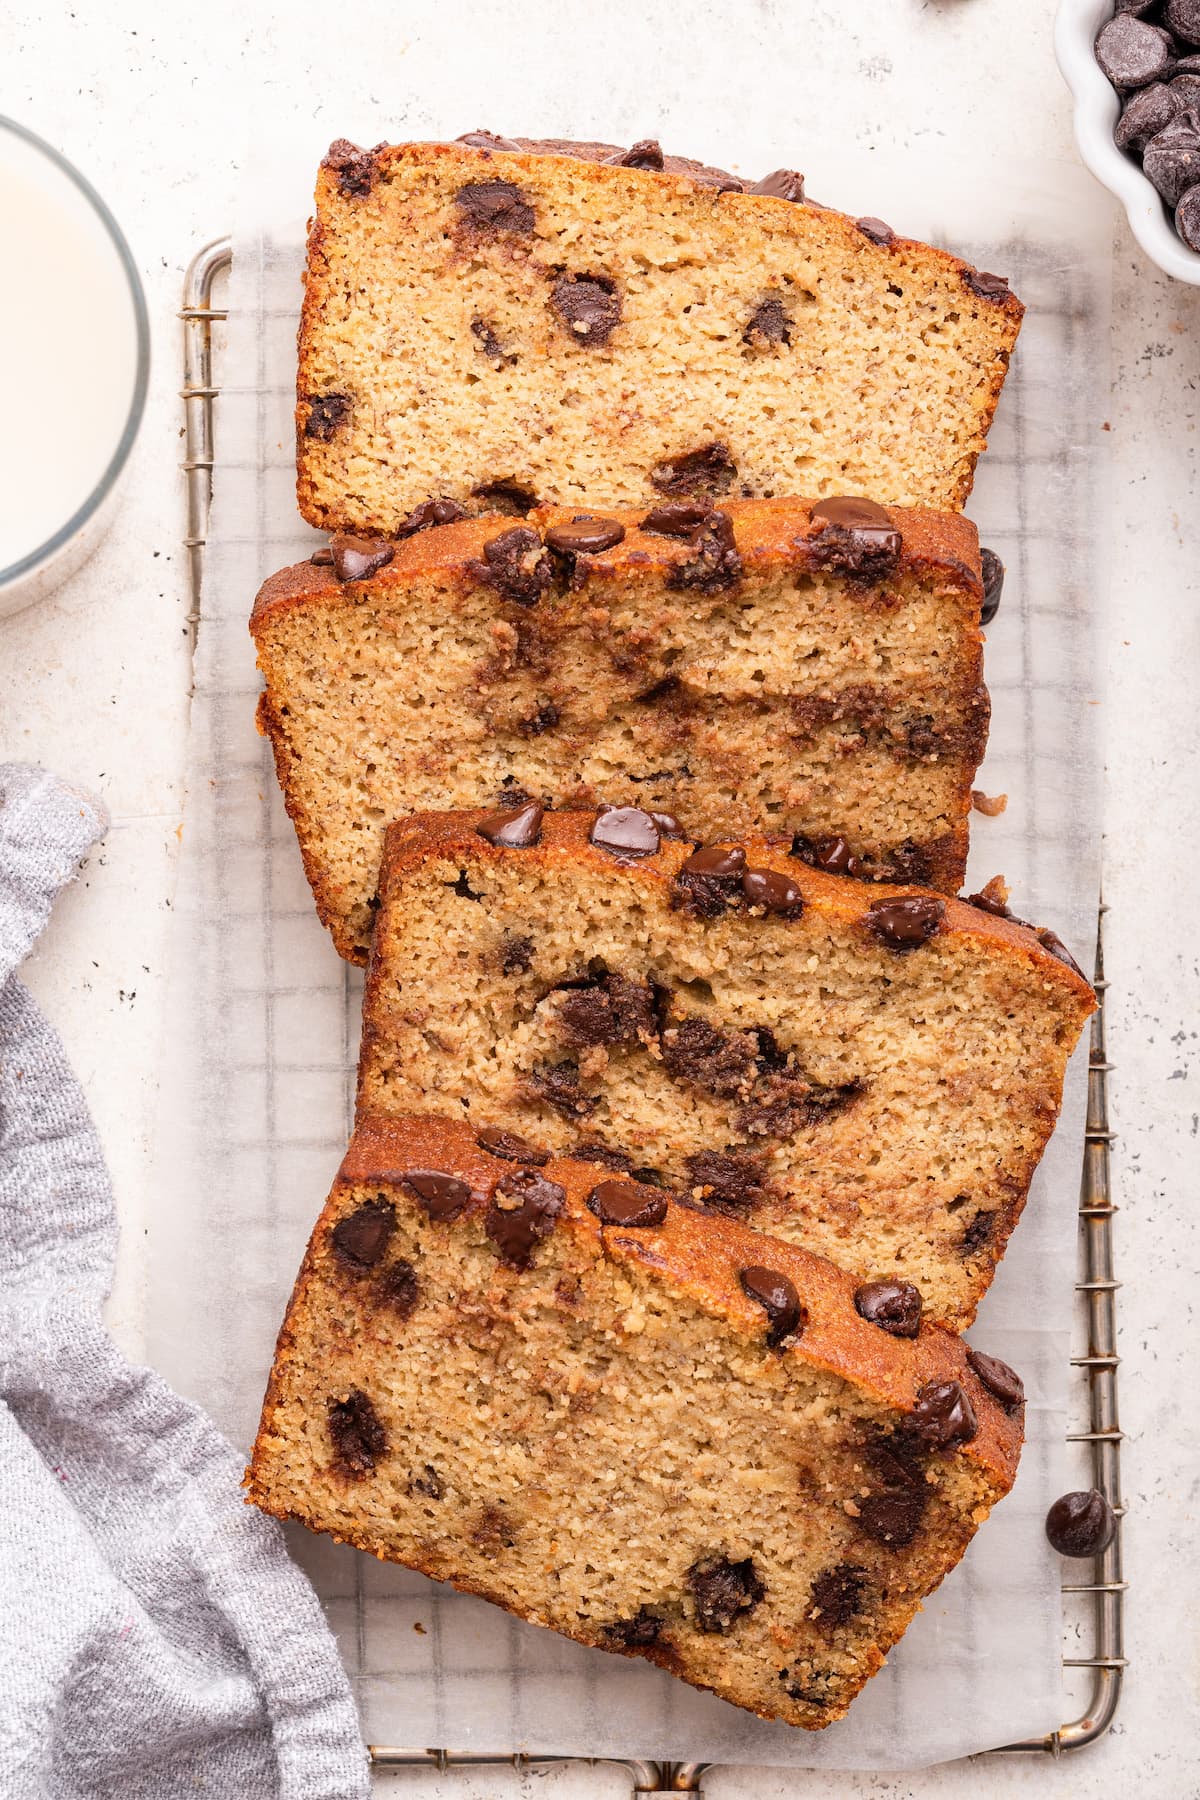 Multiple slices of almond flour banana bread with chocolate chips on a cooling rack.